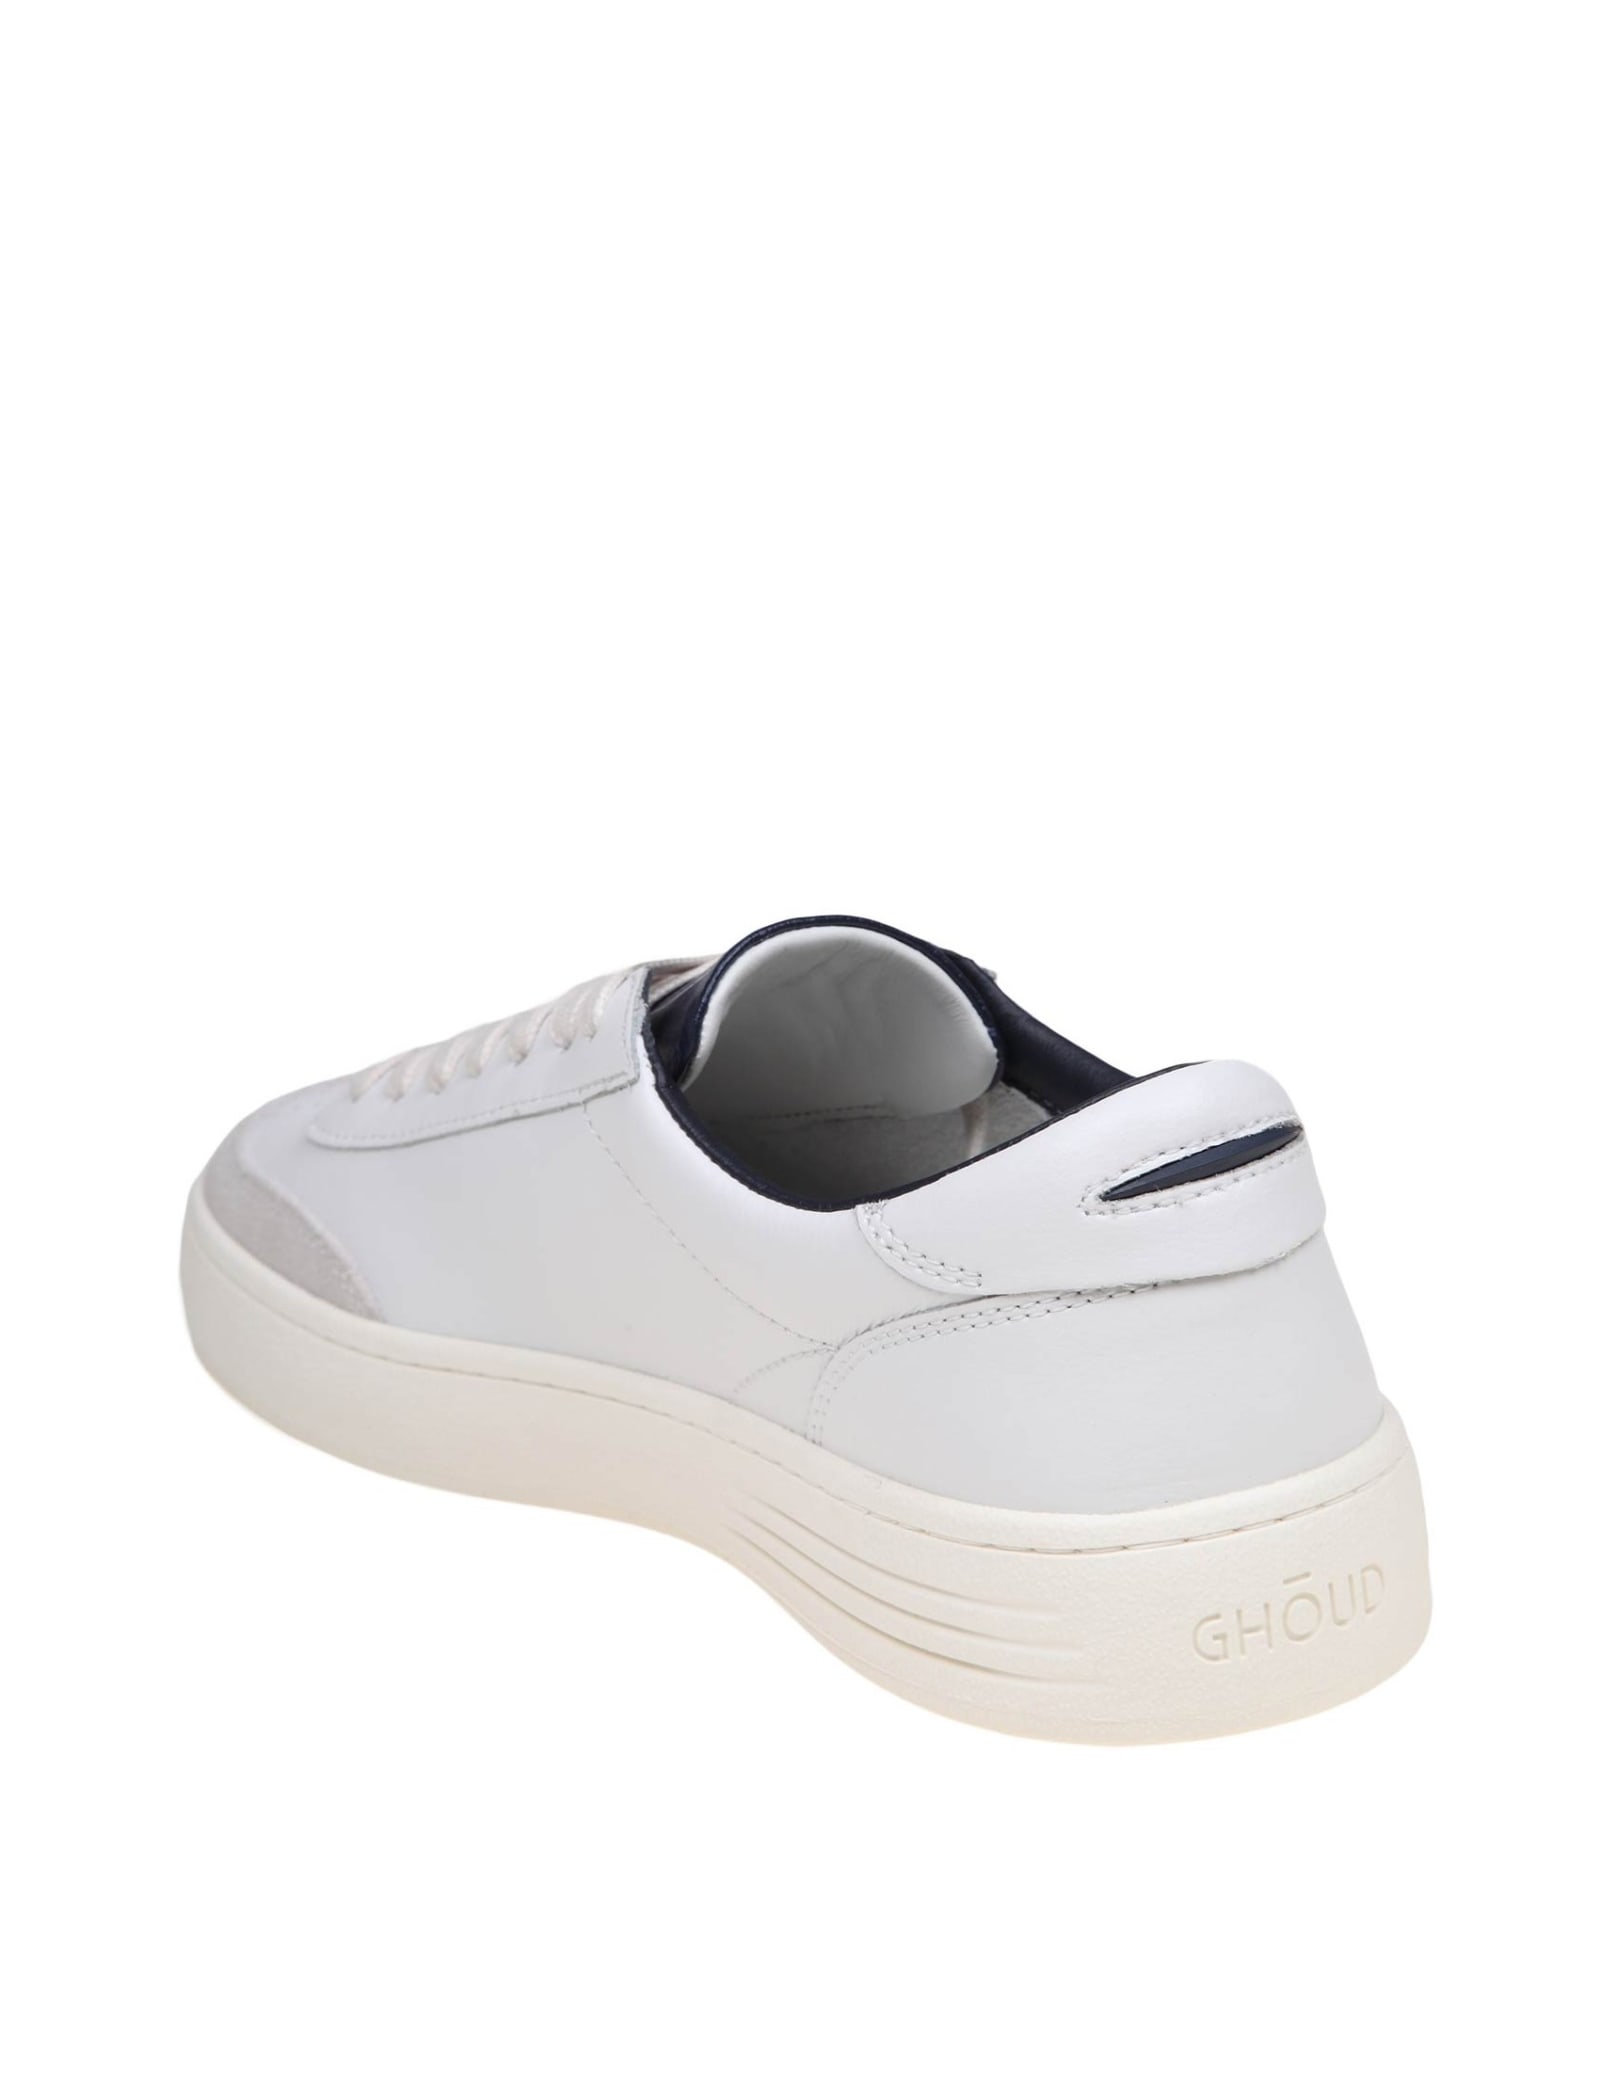 Shop Ghoud Lido Low Sneakers In White/blue Leather And Suede In Leat/suede Wht/blue